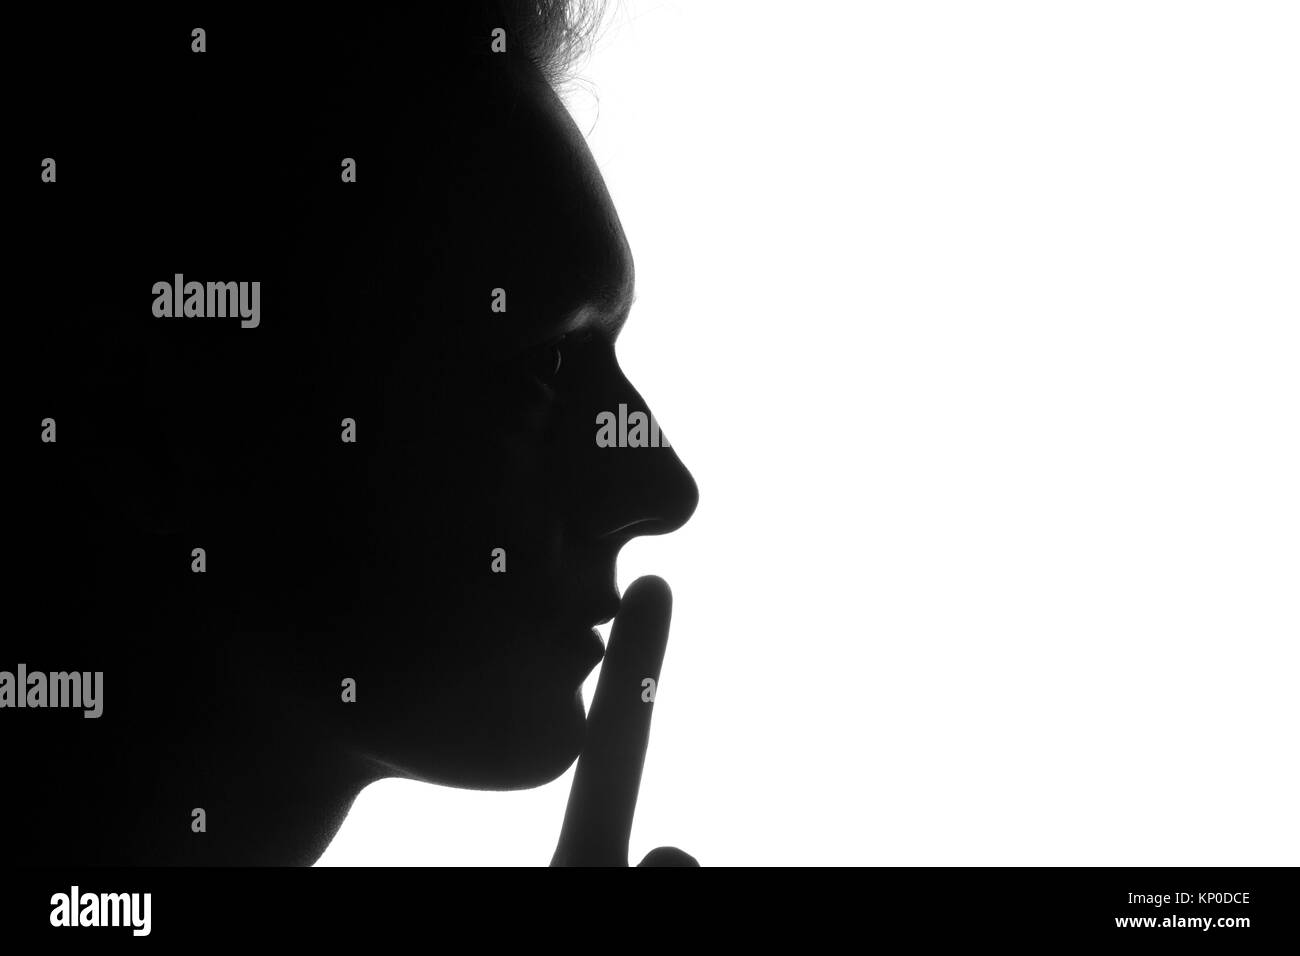 silhouette of a person in profile with a finger near the lips on a white background. Silens concept Stock Photo